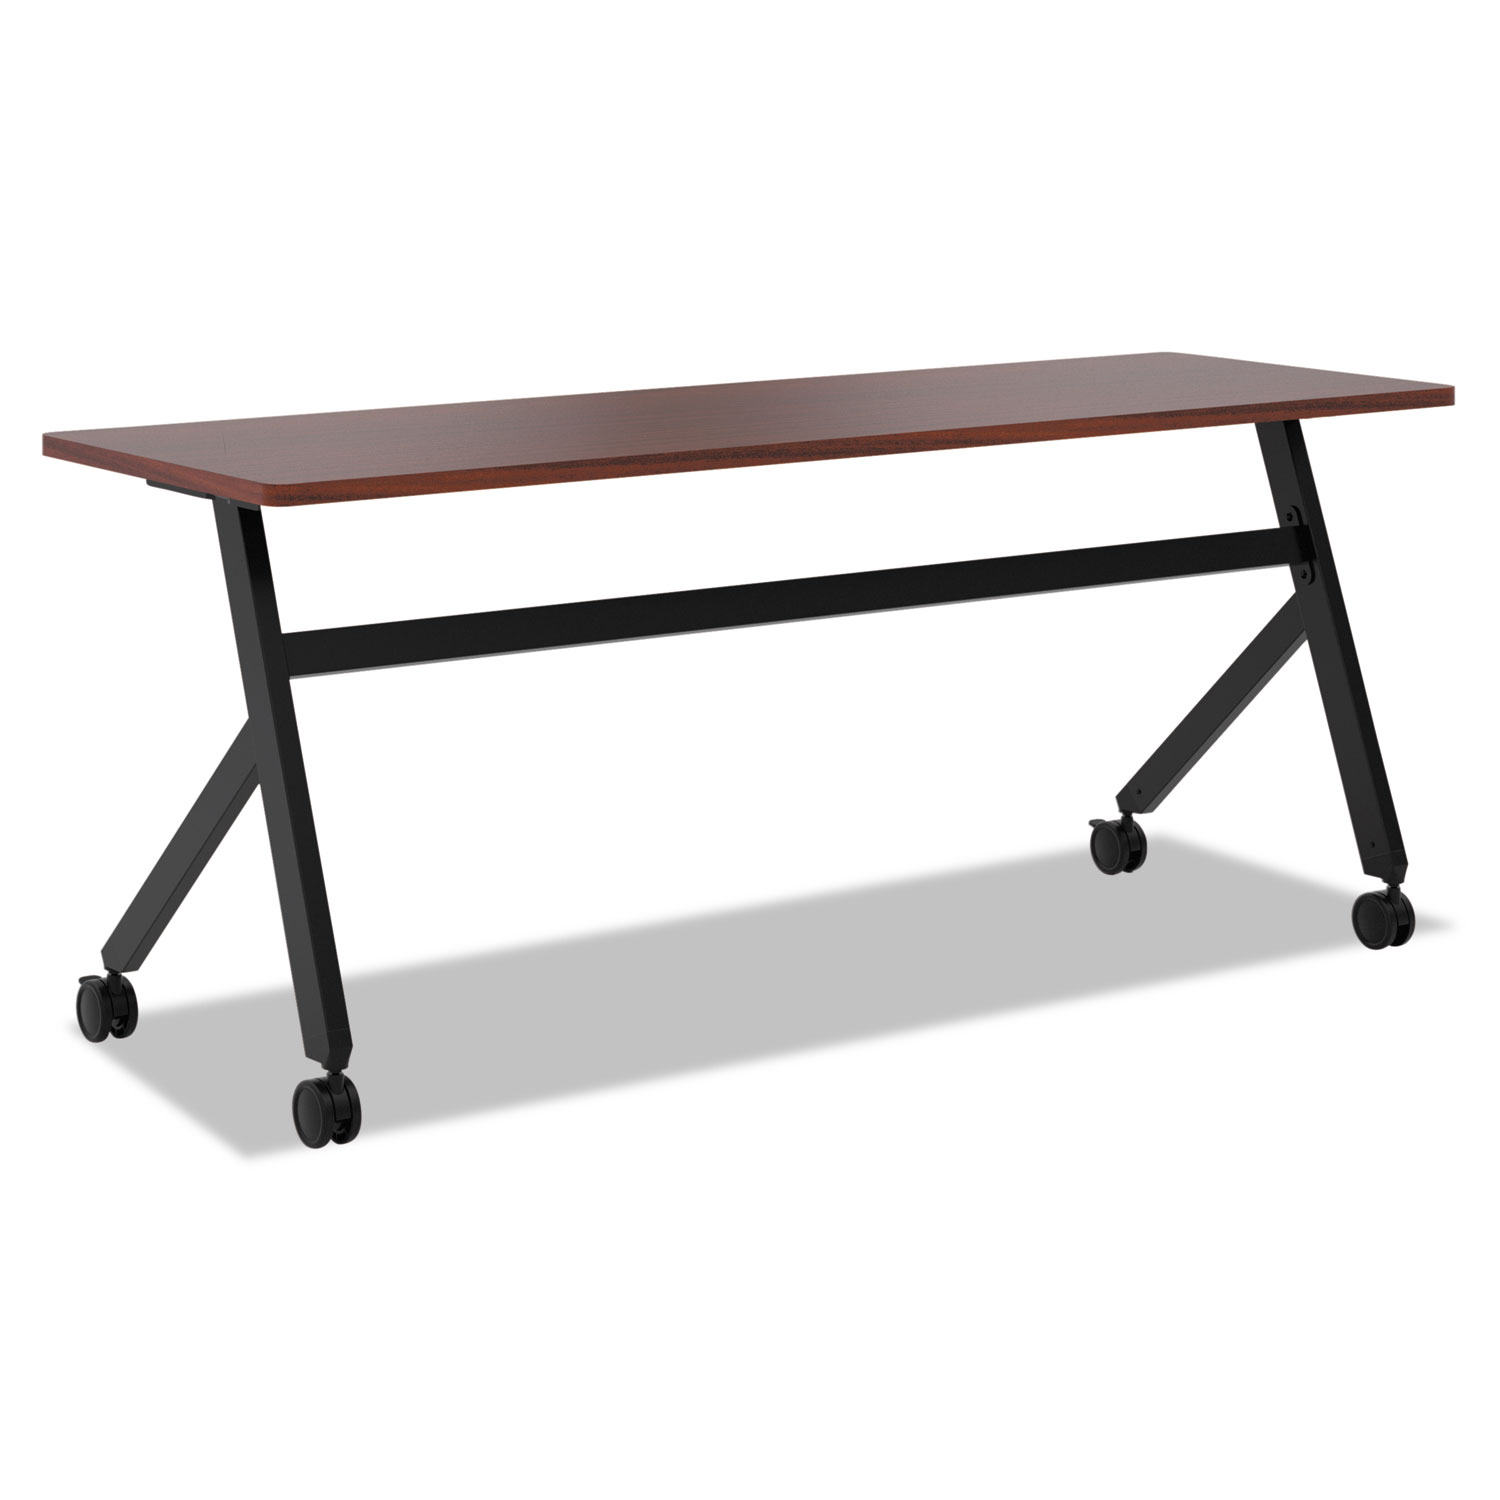 Multipurpose Table Fixed Base Table, 72w x 24d x 29 3/8h, Chestnut